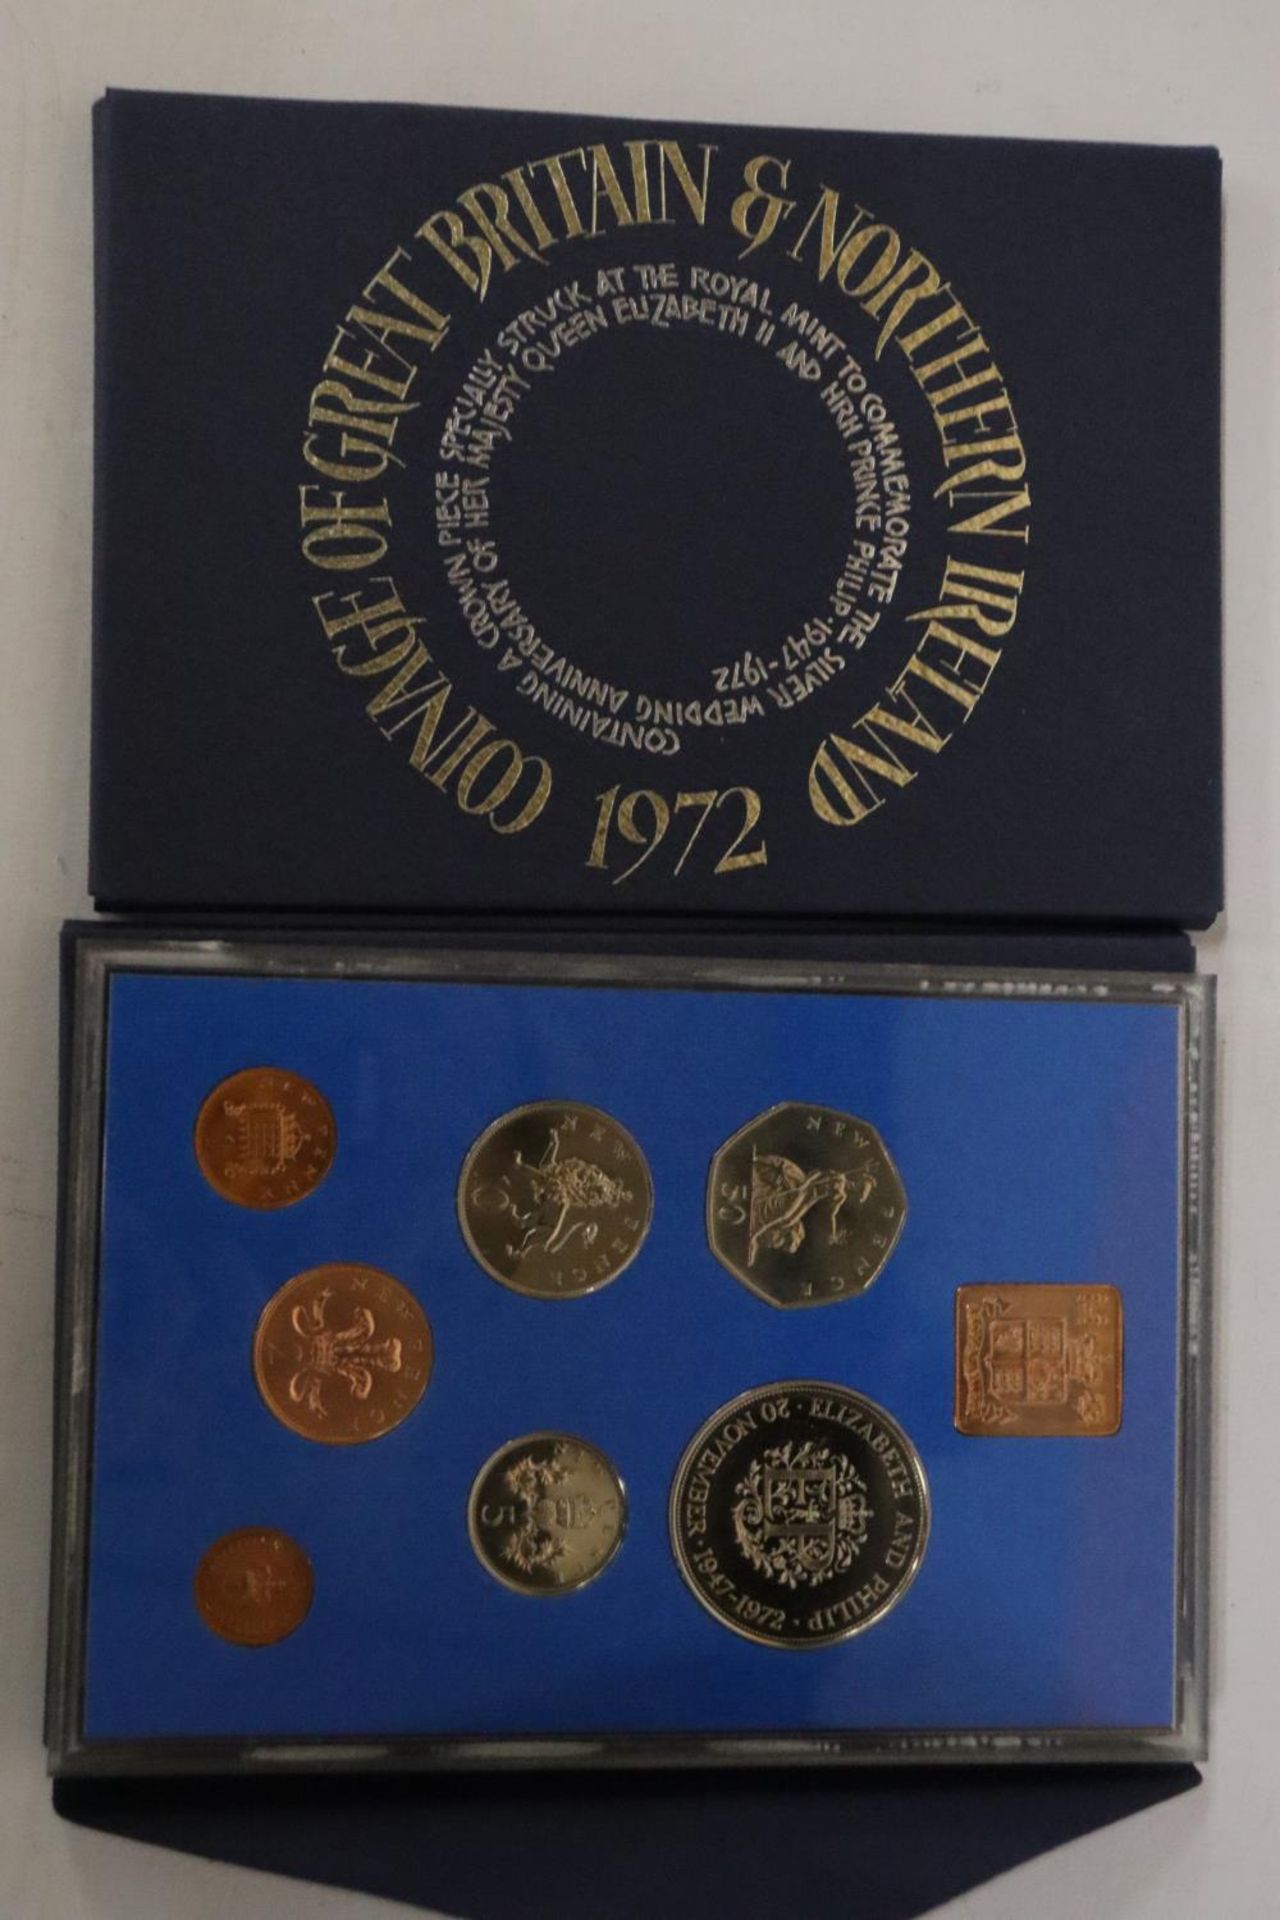 UK & NI , 2 X 1972, 2 X’73, 2 X ’74 AND 2 X ’75 YEAR PACKS OF COINS CONTAINED IN ENVELOPE - Bild 5 aus 5